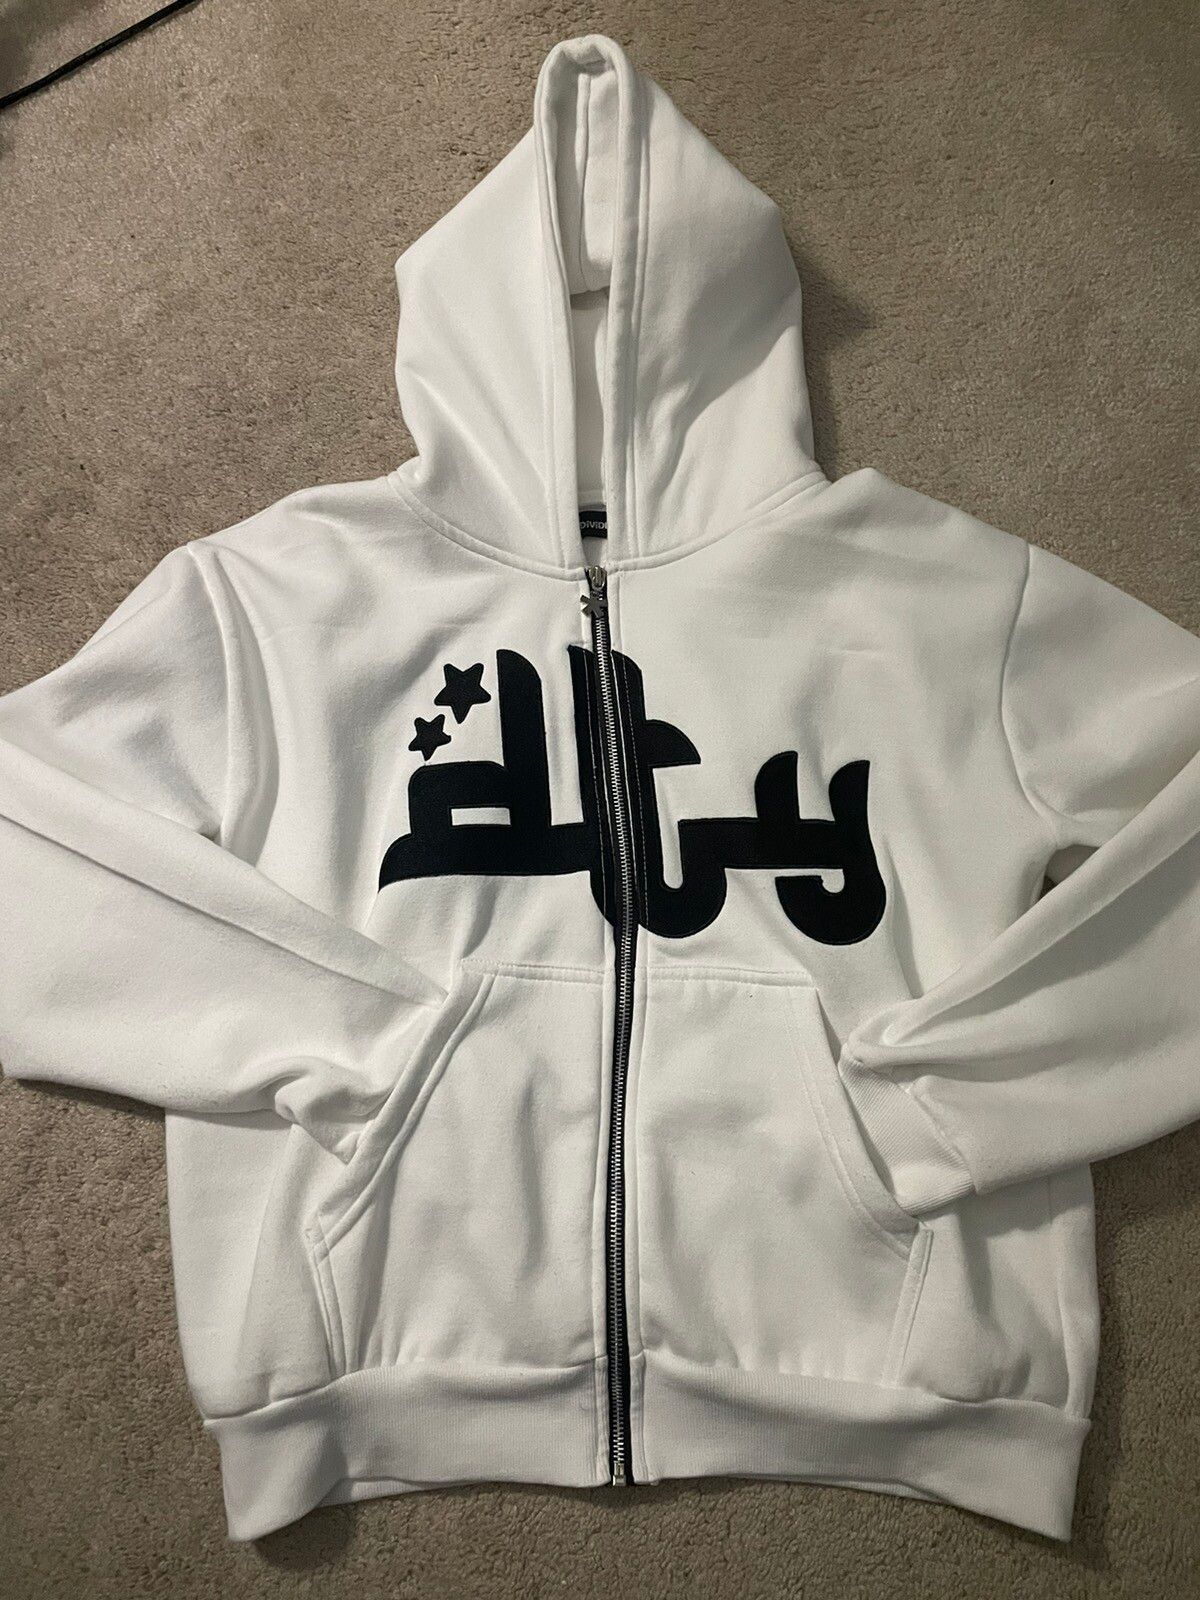 Streetwear Divide The Youth White Zip Up Hoodie Size US M / EU 48-50 / 2 - 1 Preview